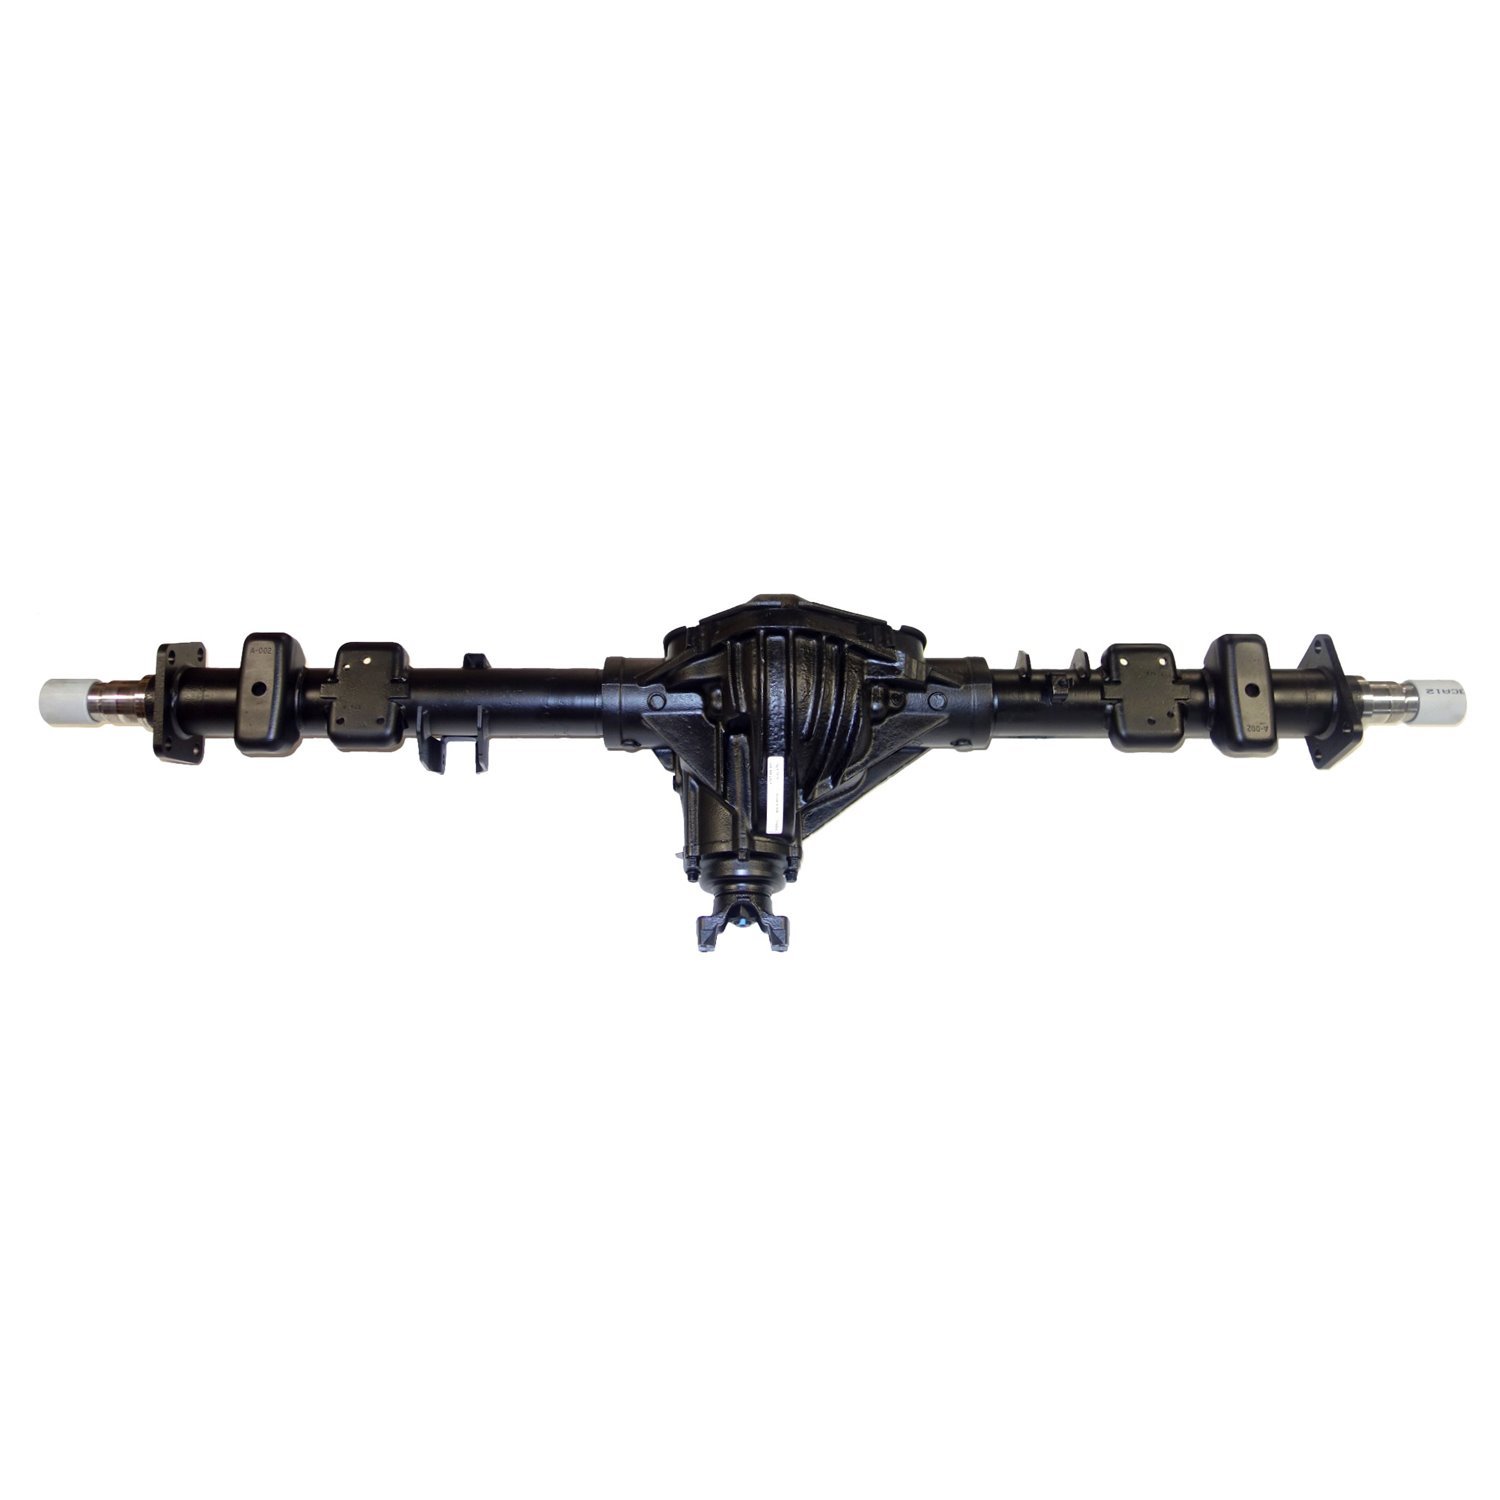 Remanufactured Complete Axle Assy for GM 14 Bolt Truck 90-00 GM 3500, SRW, Pickup 3.73